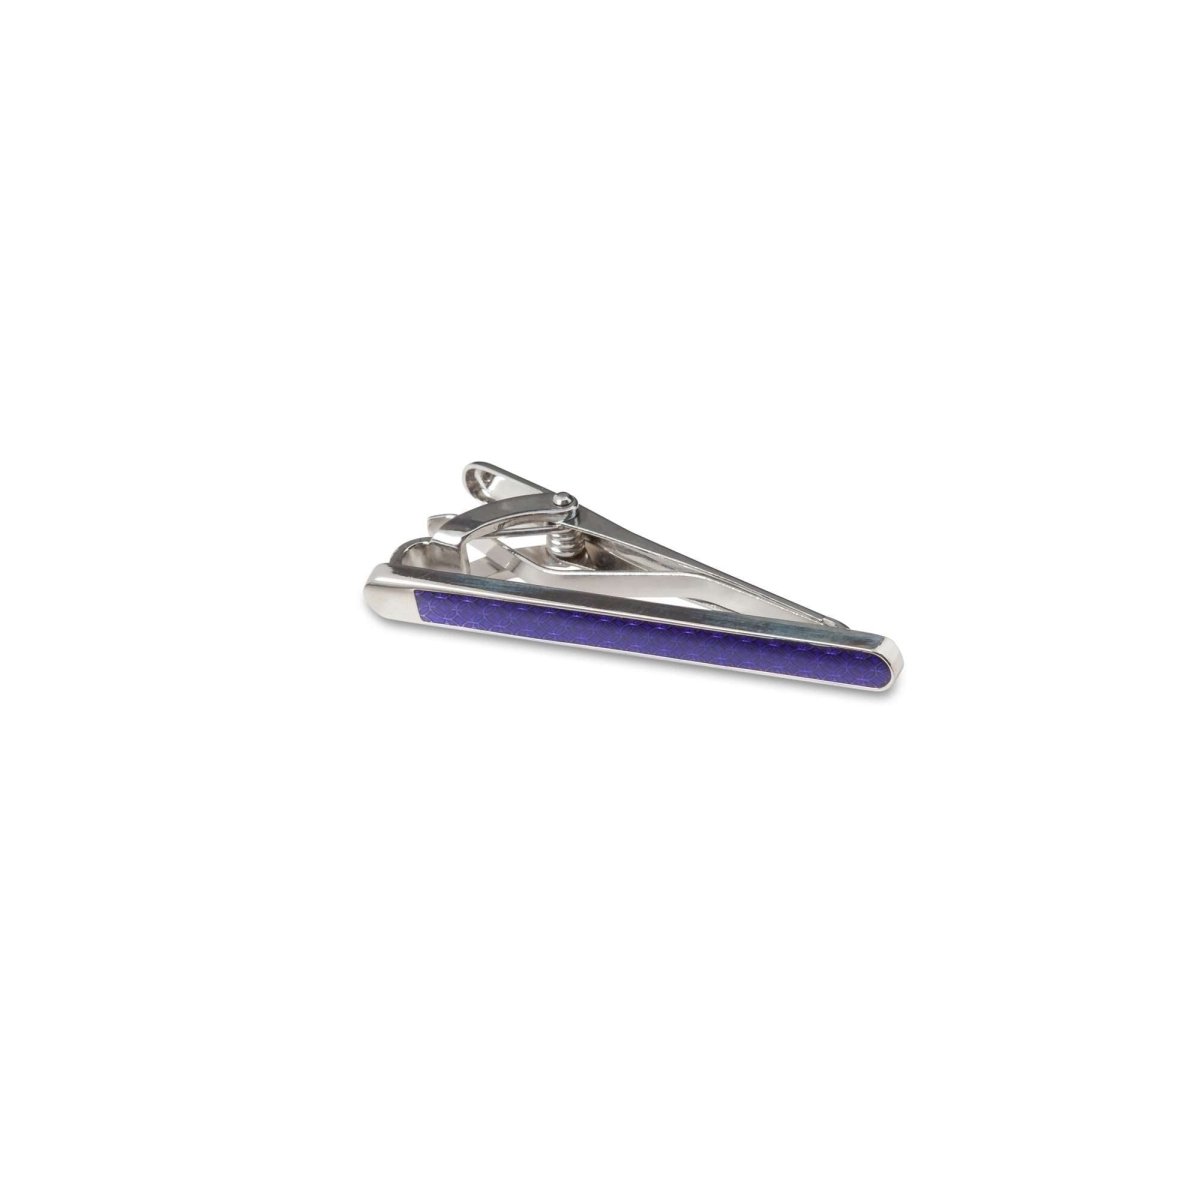 Silver and Purple Inlay Tie Bar - MenSuits